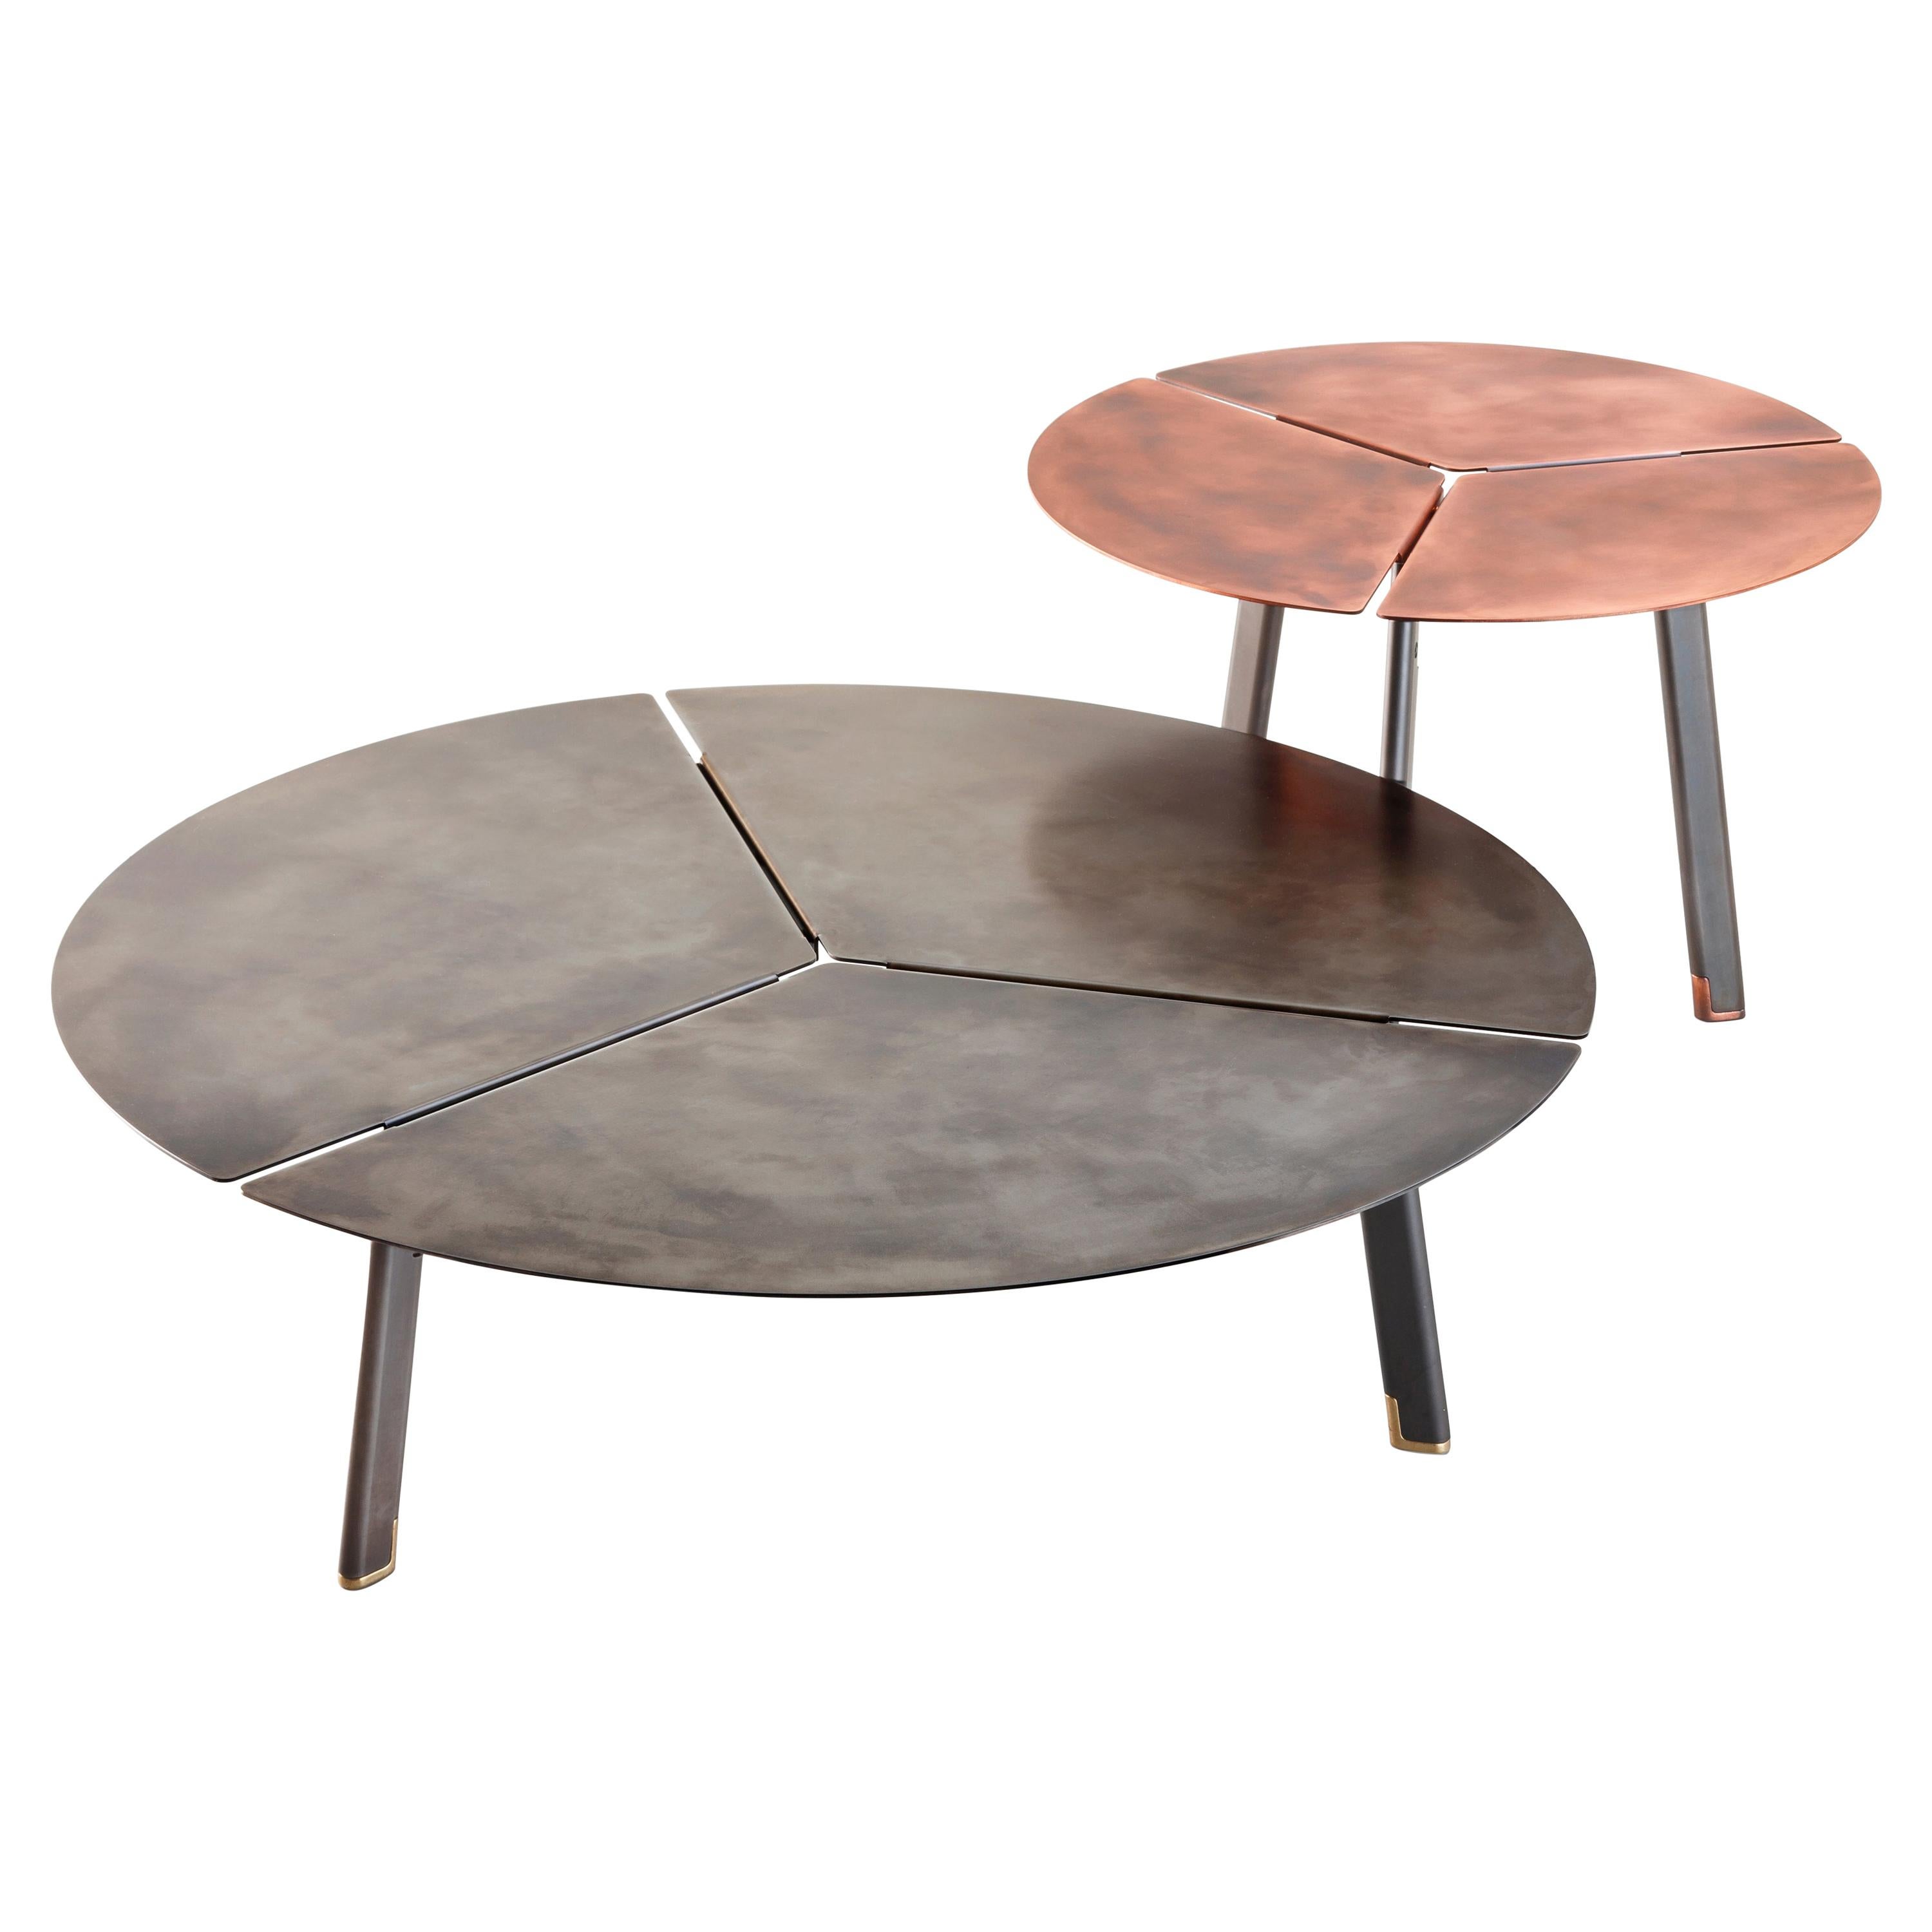 DeCastelli Placas Small Table in Copper by LucidiPevere